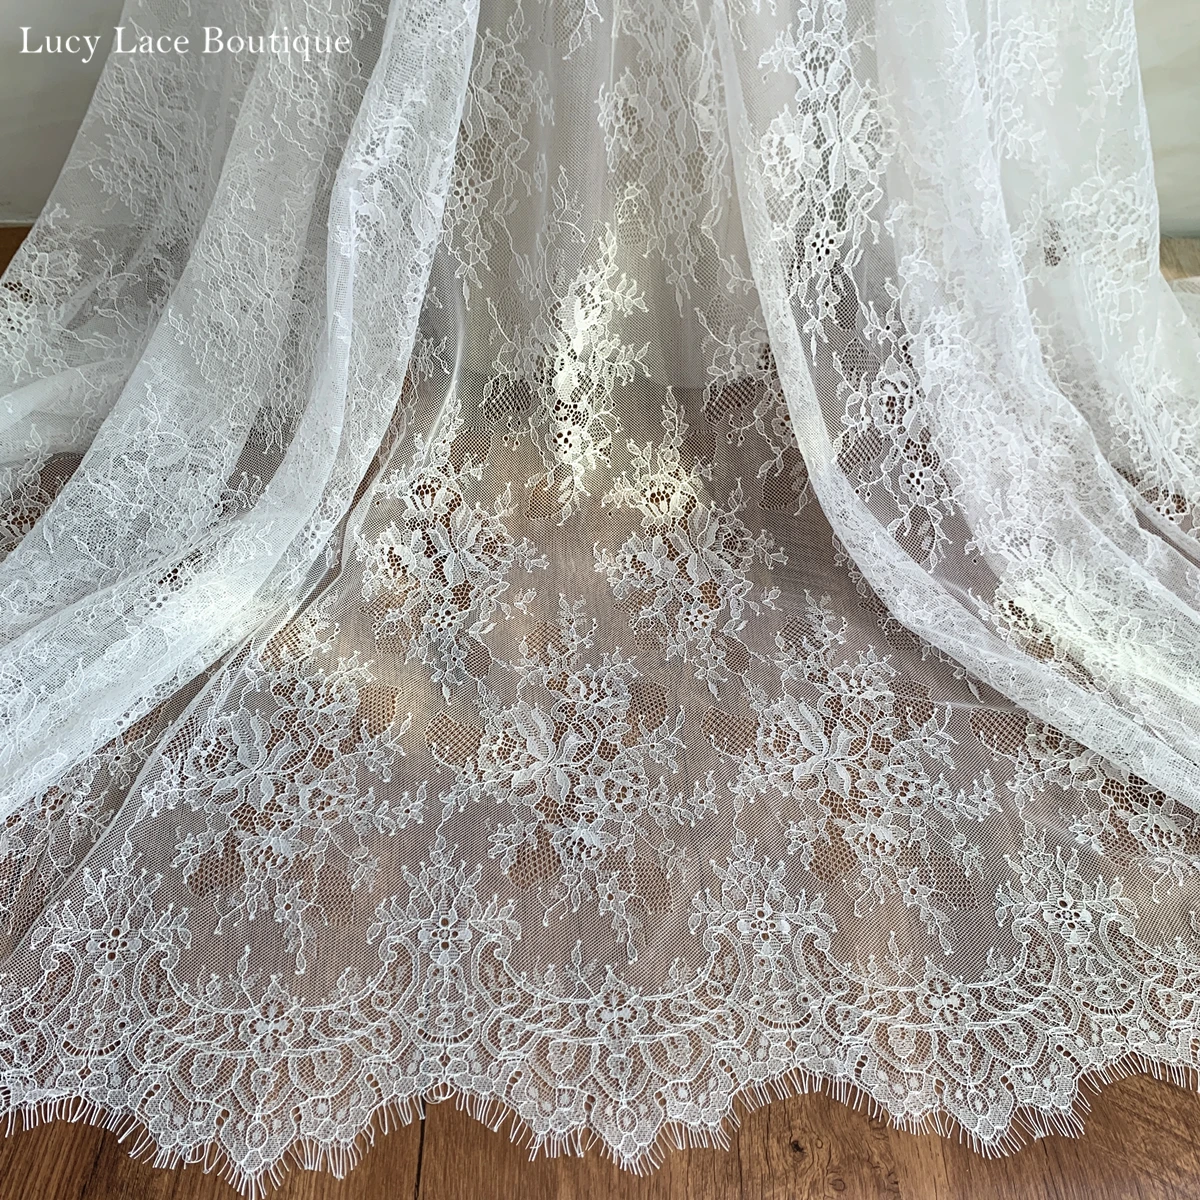 

High Quality Wedding Fabric Eyelash French Lace Fabric Material Off White 1 Piece 1.5x3 Meters